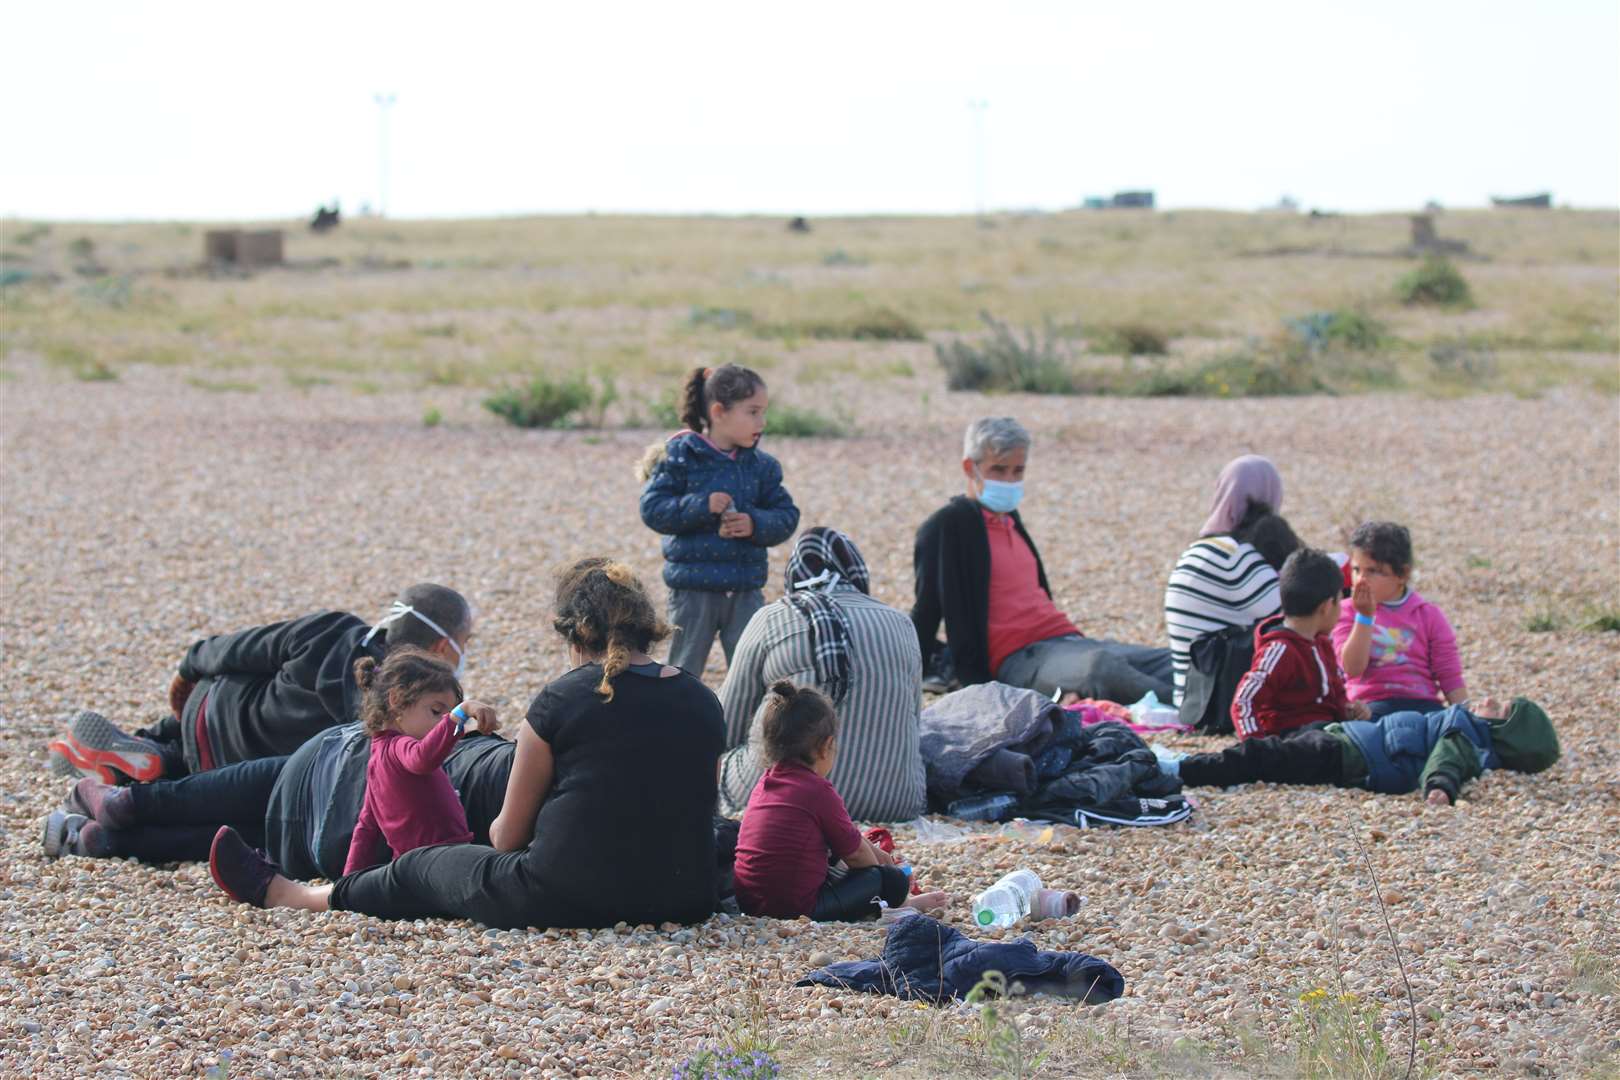 A record number of migrants have been crossing the Channel Picture: Susan Pilcher